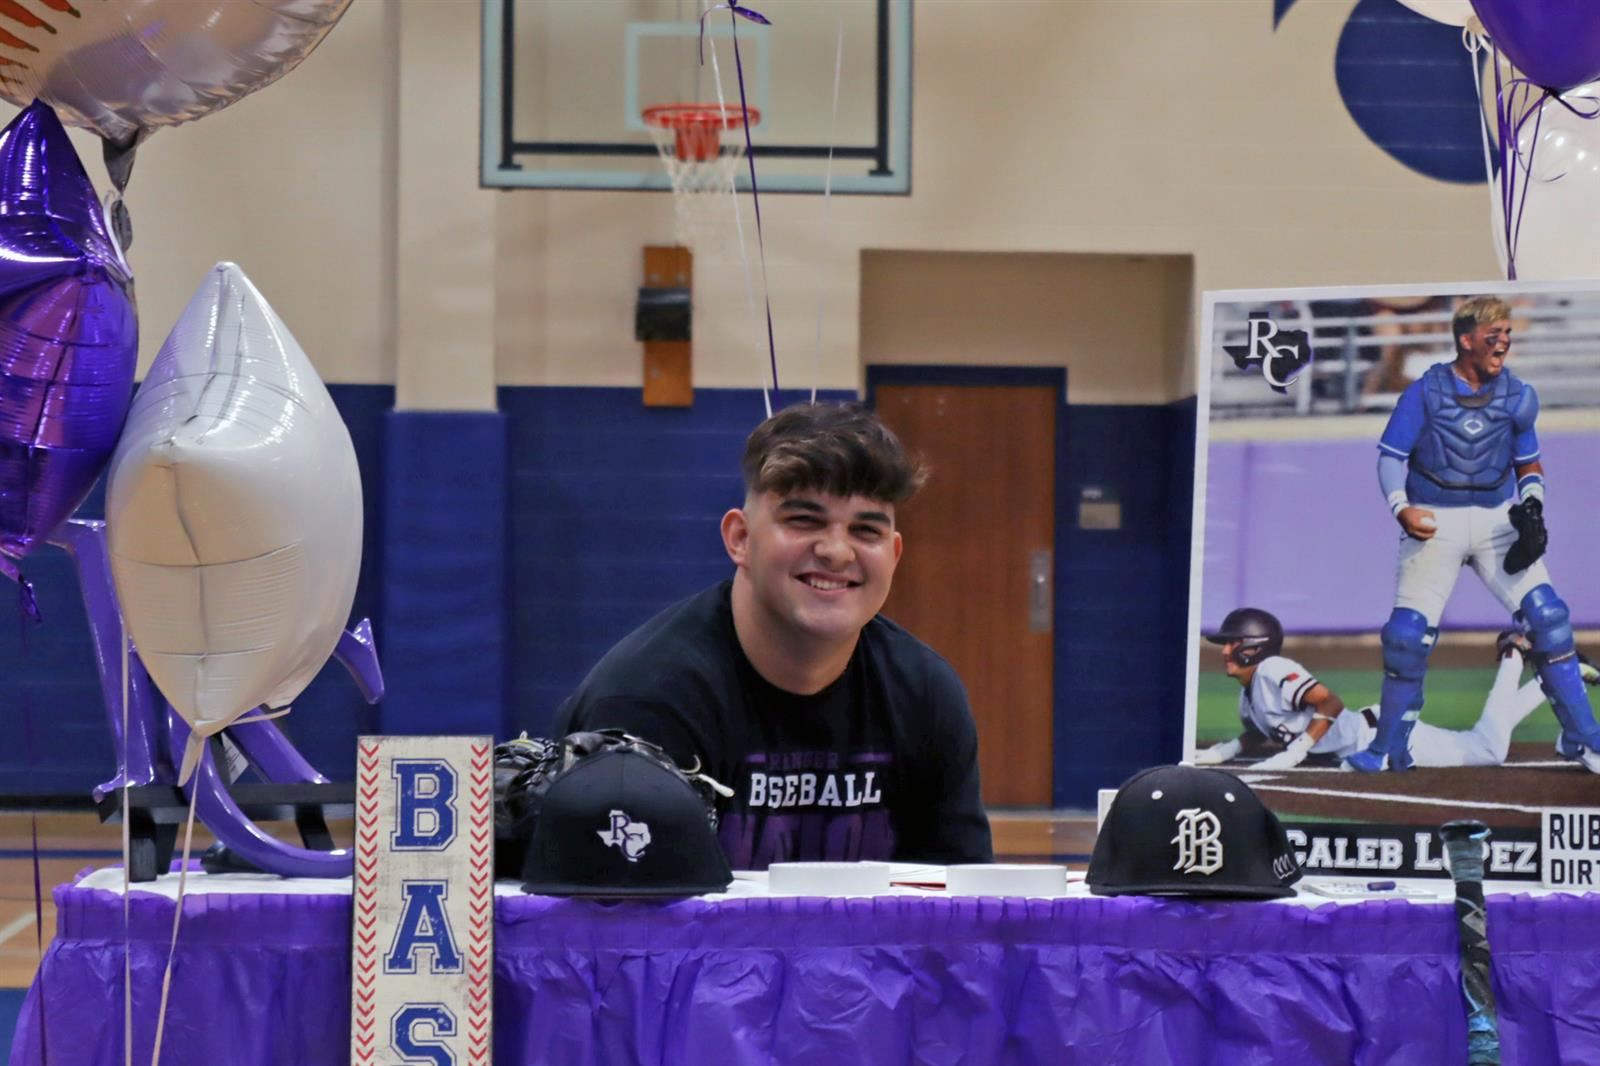 Cypress Creek High School senior Caleb Lopez signed a letter of intent to play baseball at Ranger College.